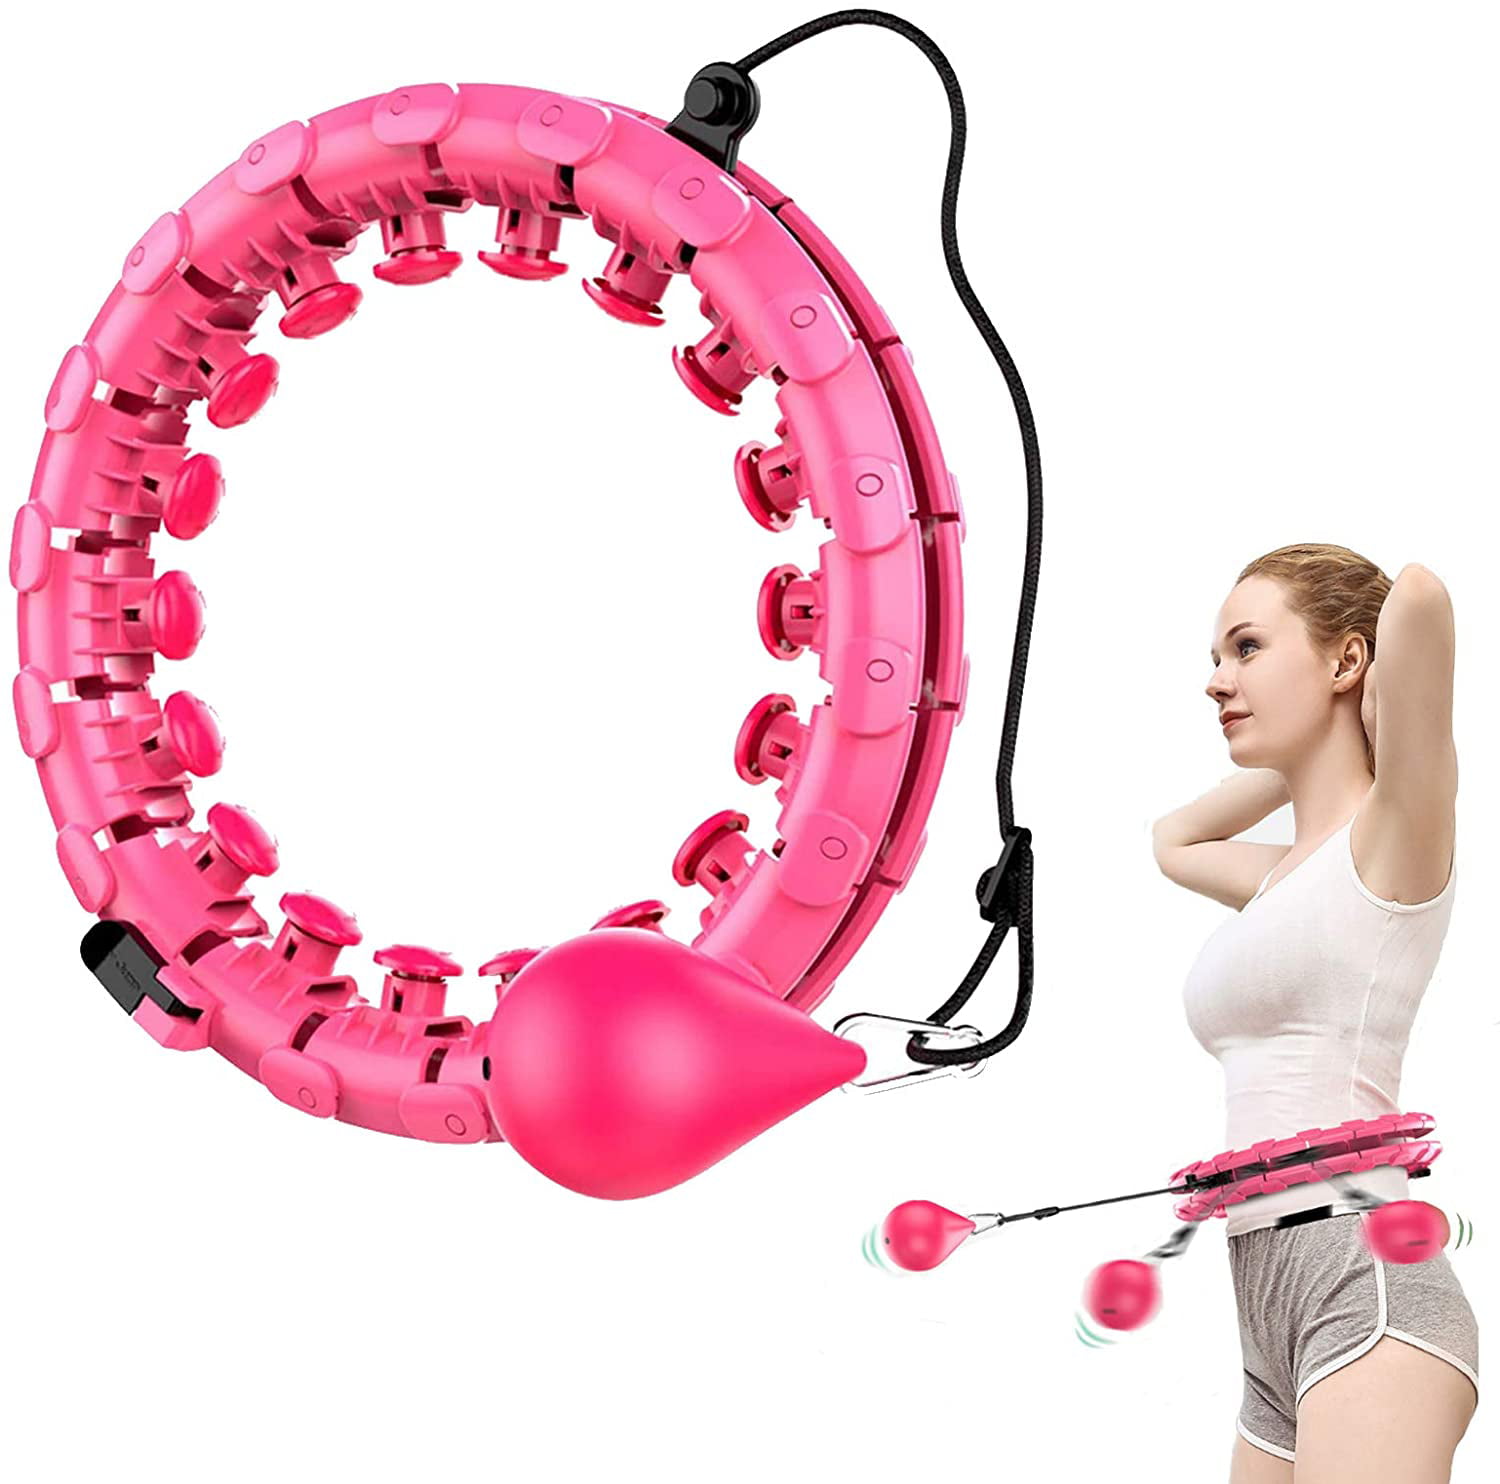 2 in 1 Abdomen Fitness Exercise Massage Hoola Hoops,24 Sections Detachable Hoola Hoop Weighted Smart Hoola Hoop That Will not Fall Suitable for Adults/Kids Weight Loss by Fun Way 